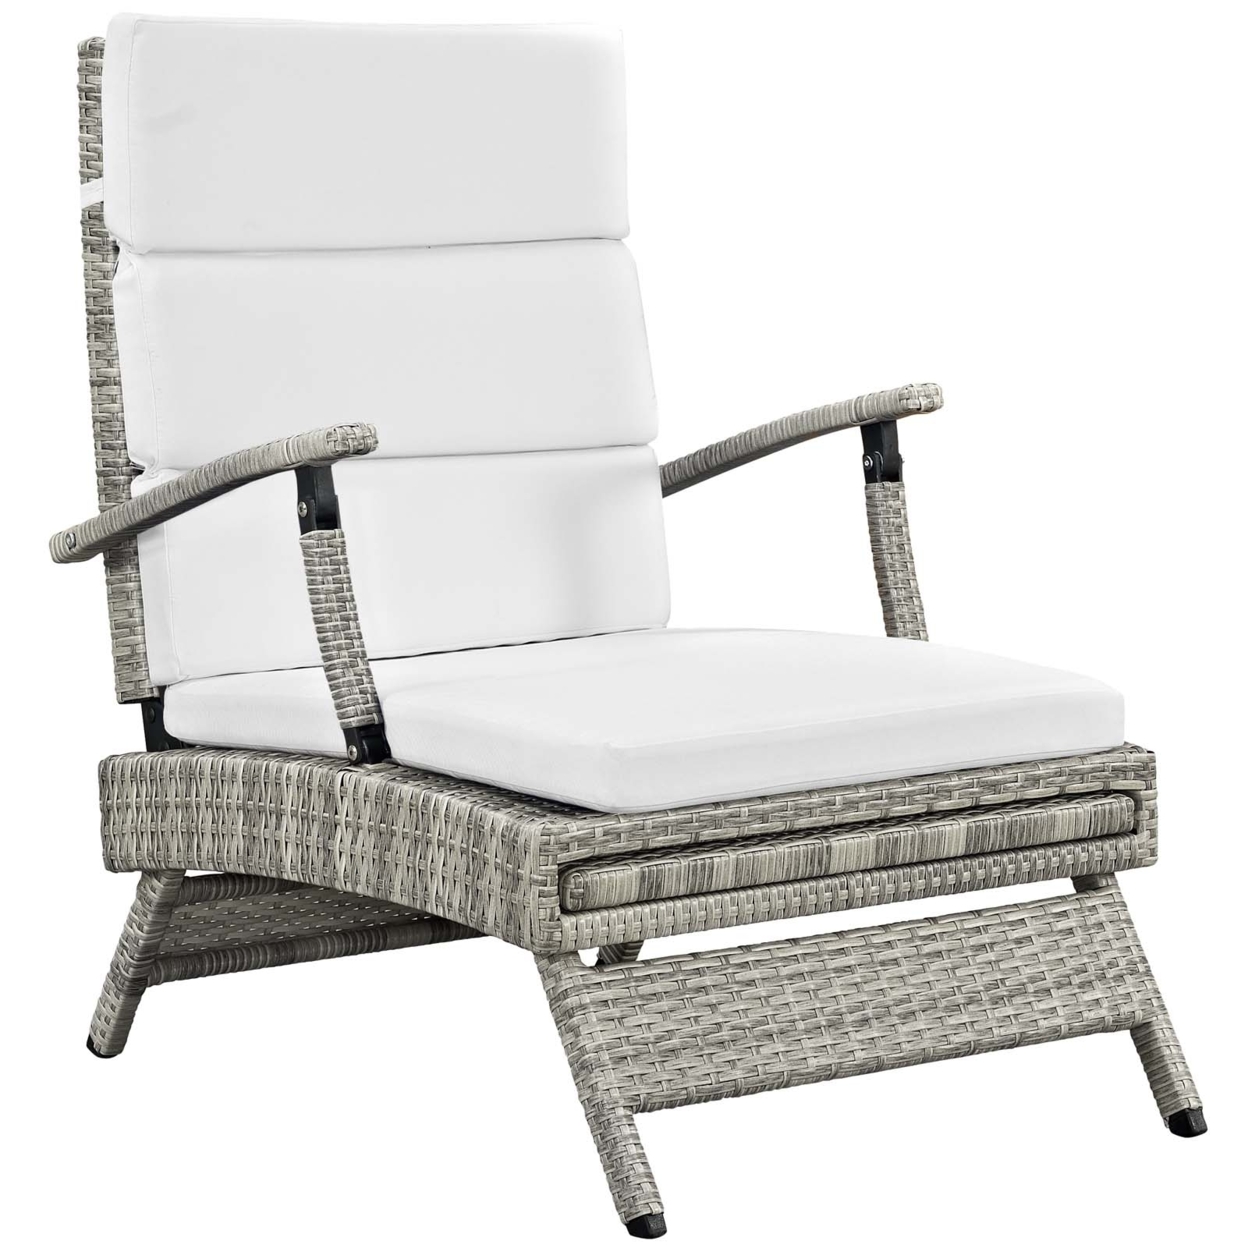 Envisage Chaise Outdoor Patio Wicker Rattan Lounge Chair,Light Gray White